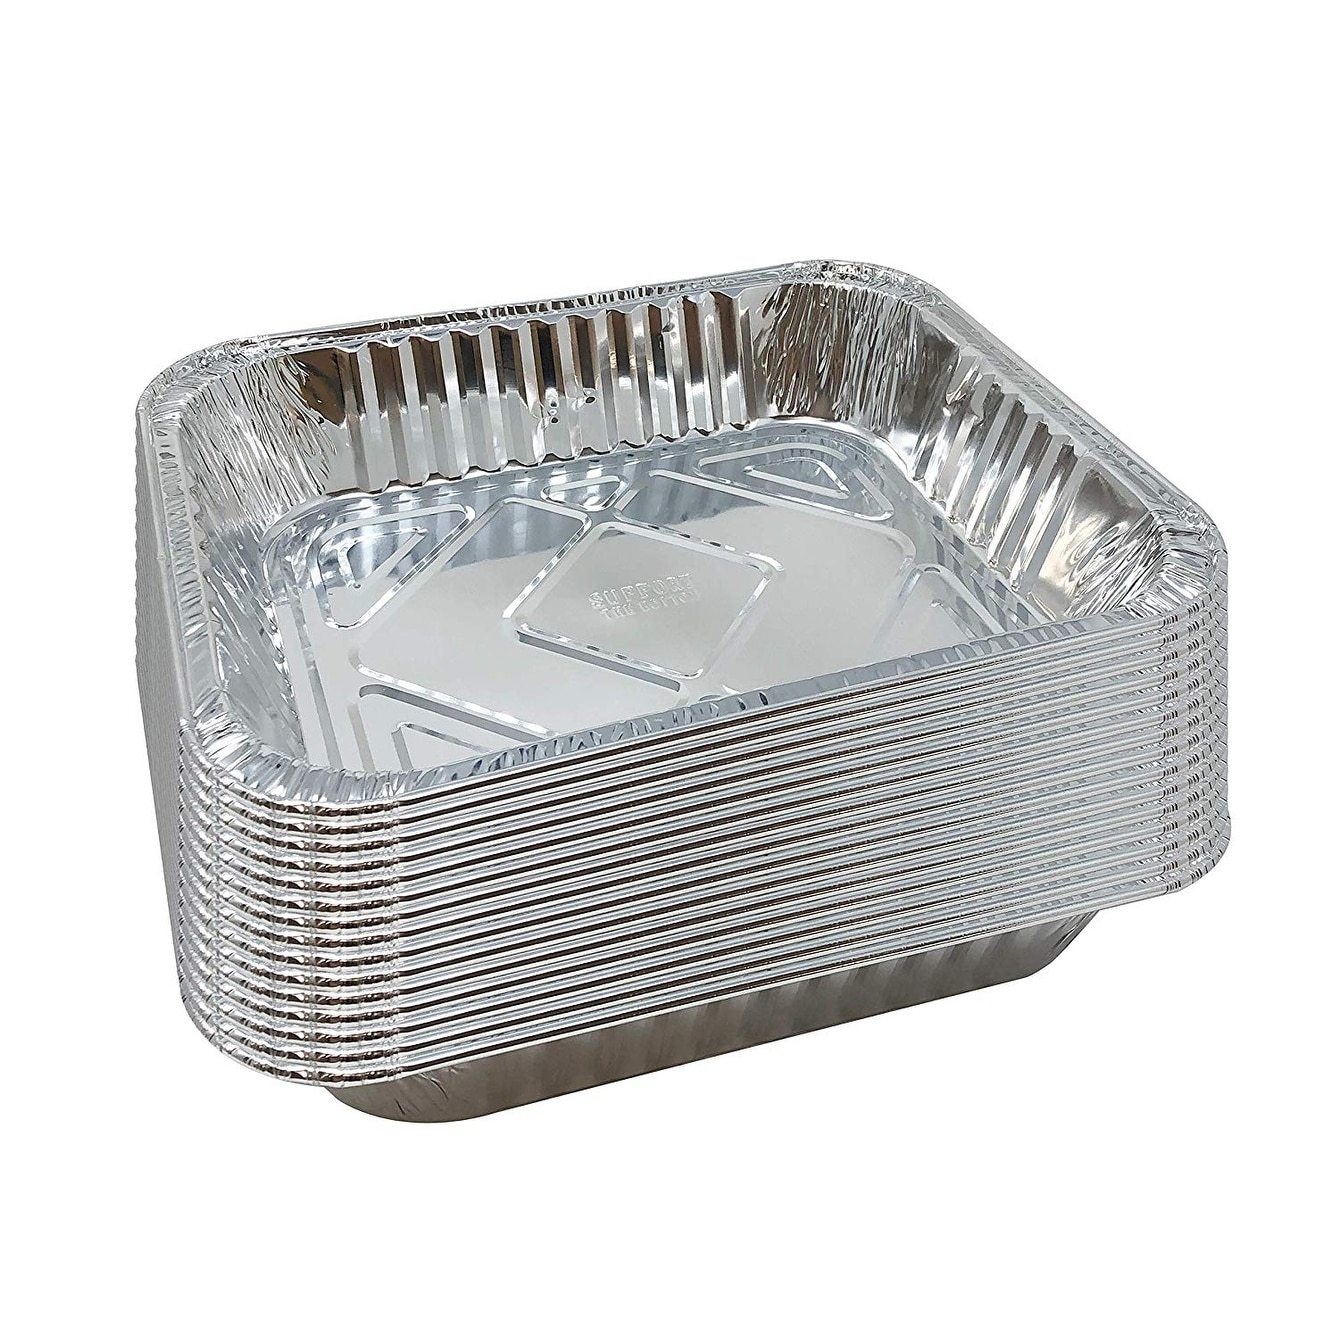 https://ak1.ostkcdn.com/images/products/30325843/Half-Size-Deep-Foil-Pan-Packs-12-1-2-x-10-1-2-Aluminum-Safe-for-Use-in-Freezer-Oven-and-Steam-Table-Pan-bc3a8ce2-41d5-45a5-8333-e14c94e6b2d0.jpg